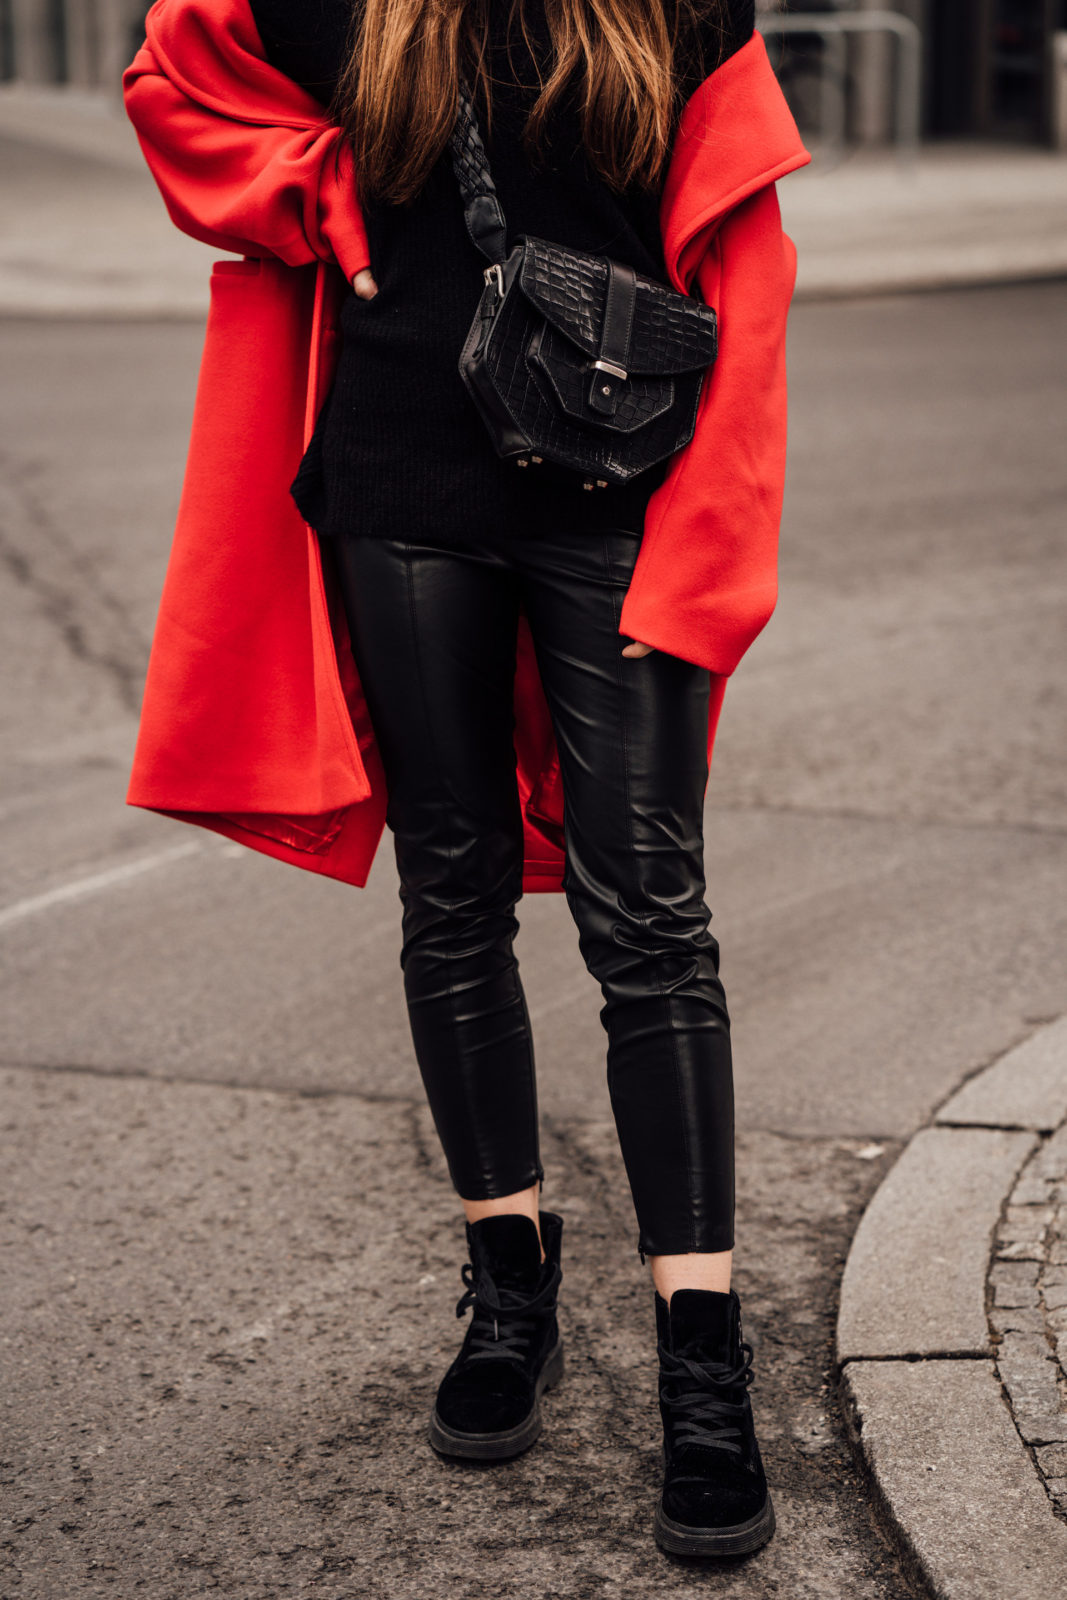 How to wear a red coat || red and black outfit || Fashionblog Berlin